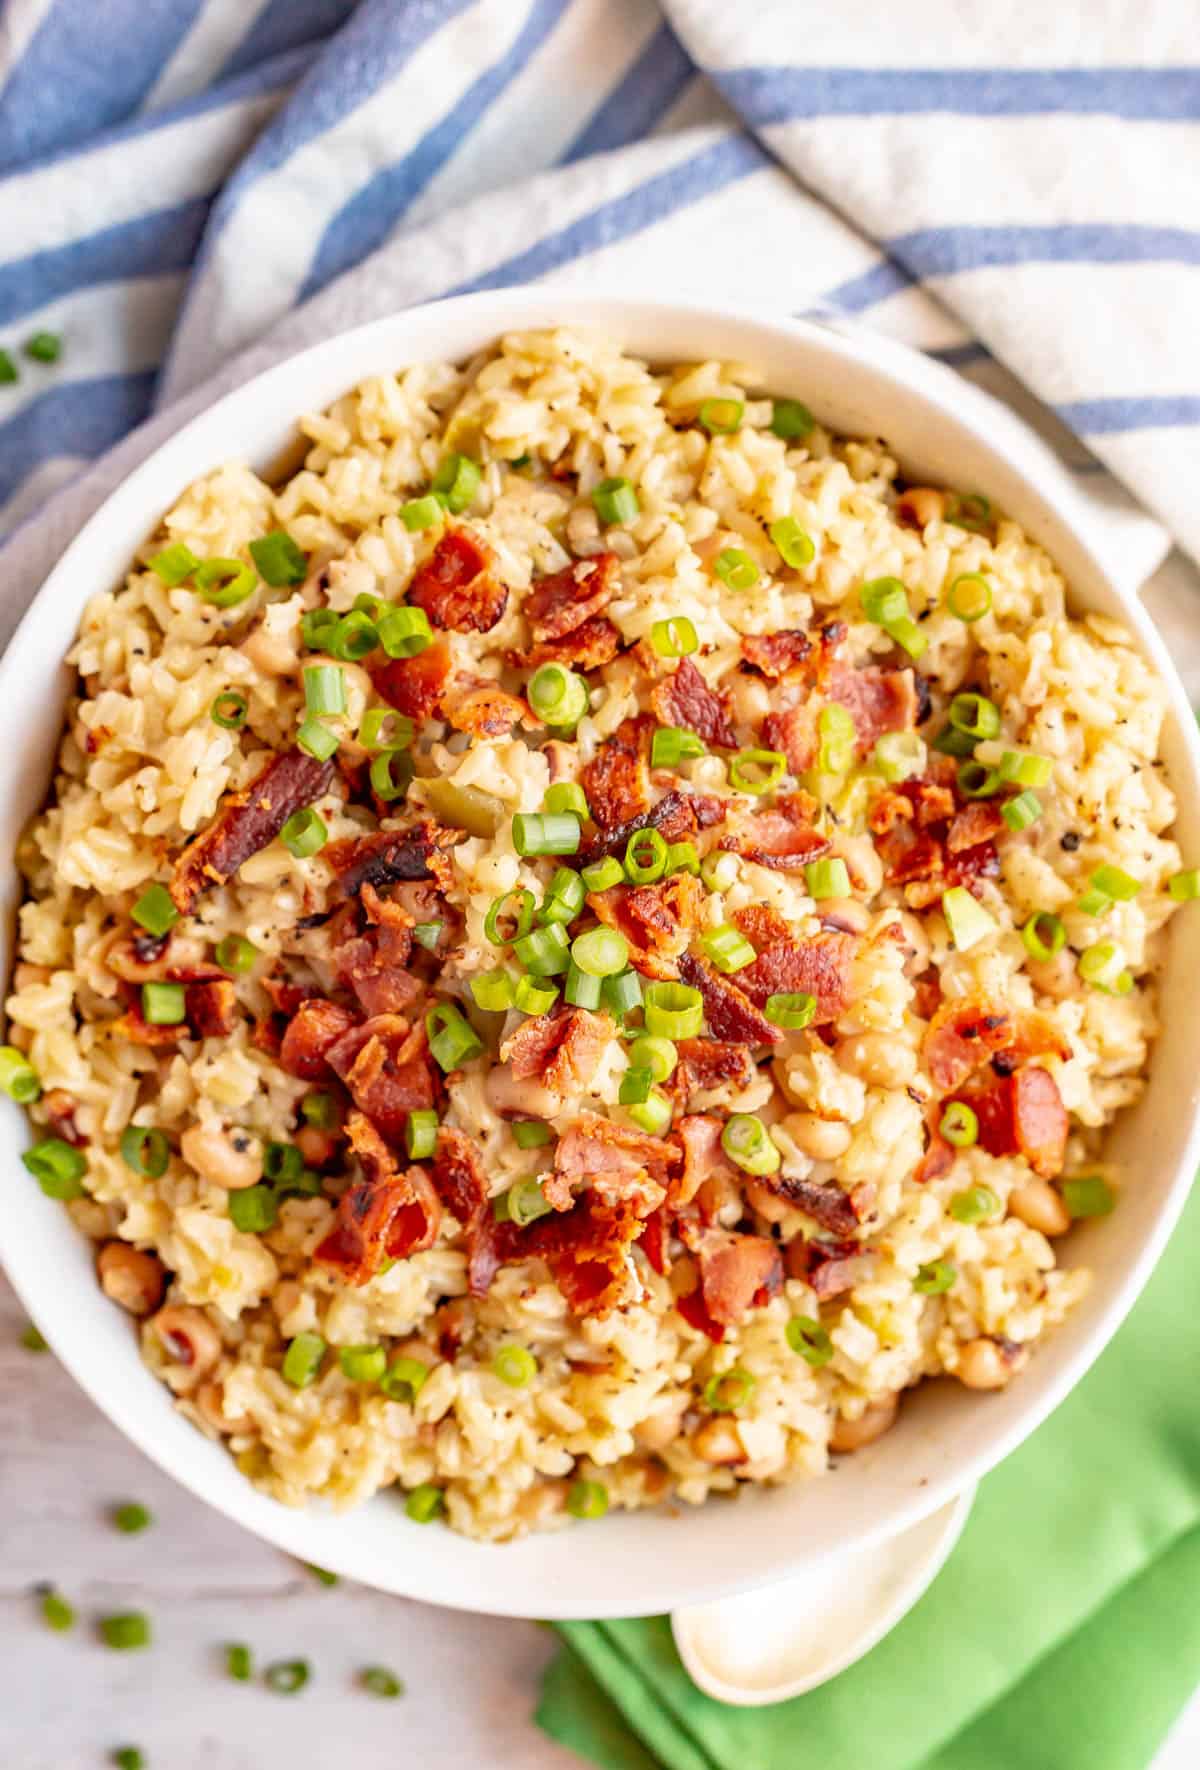 Hoppin John served in a large white bowl with crumbled bacon and green onions on top and green napkins to the side with a blue striped towel in the background.